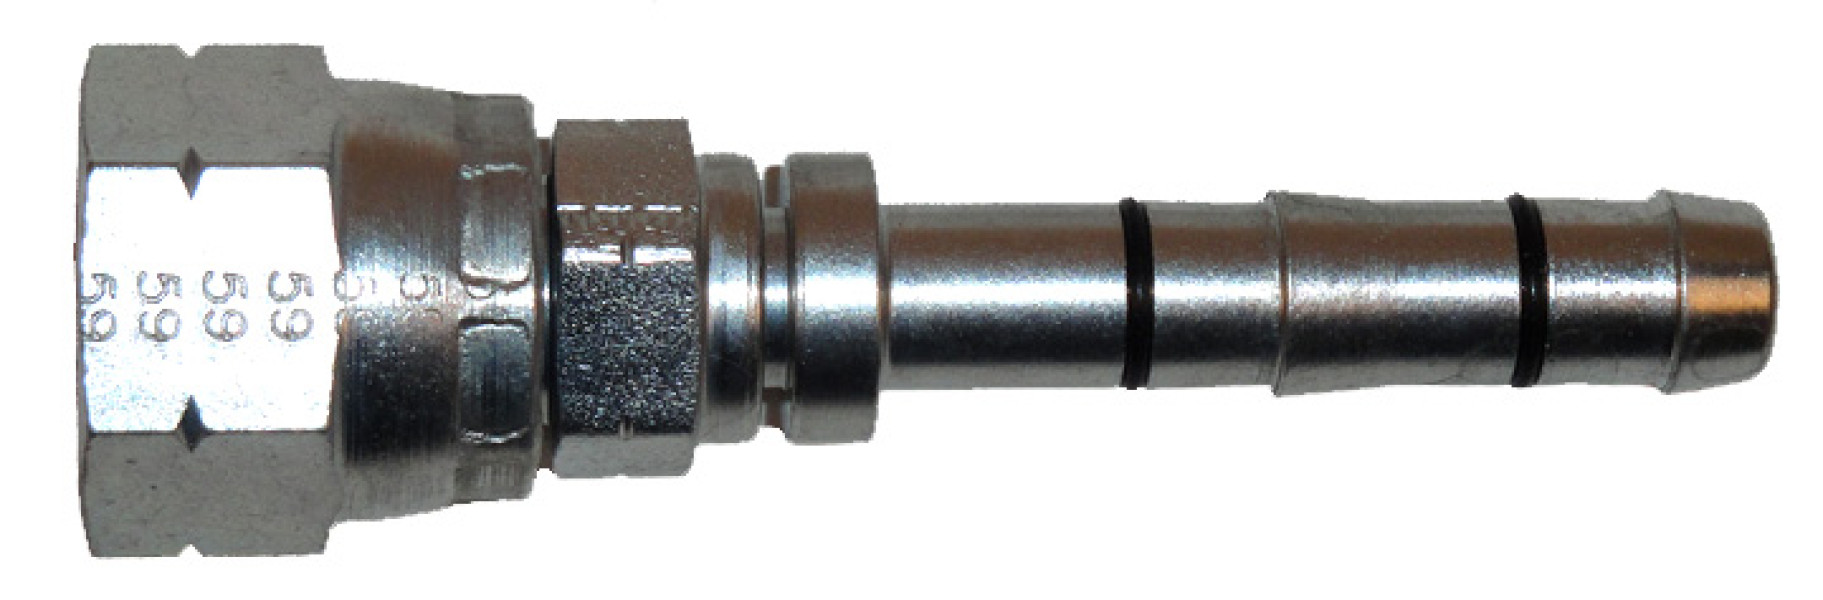 Image of A/C Refrigerant Hose Fitting from Sunair. Part number: FJ3057-01-0606S